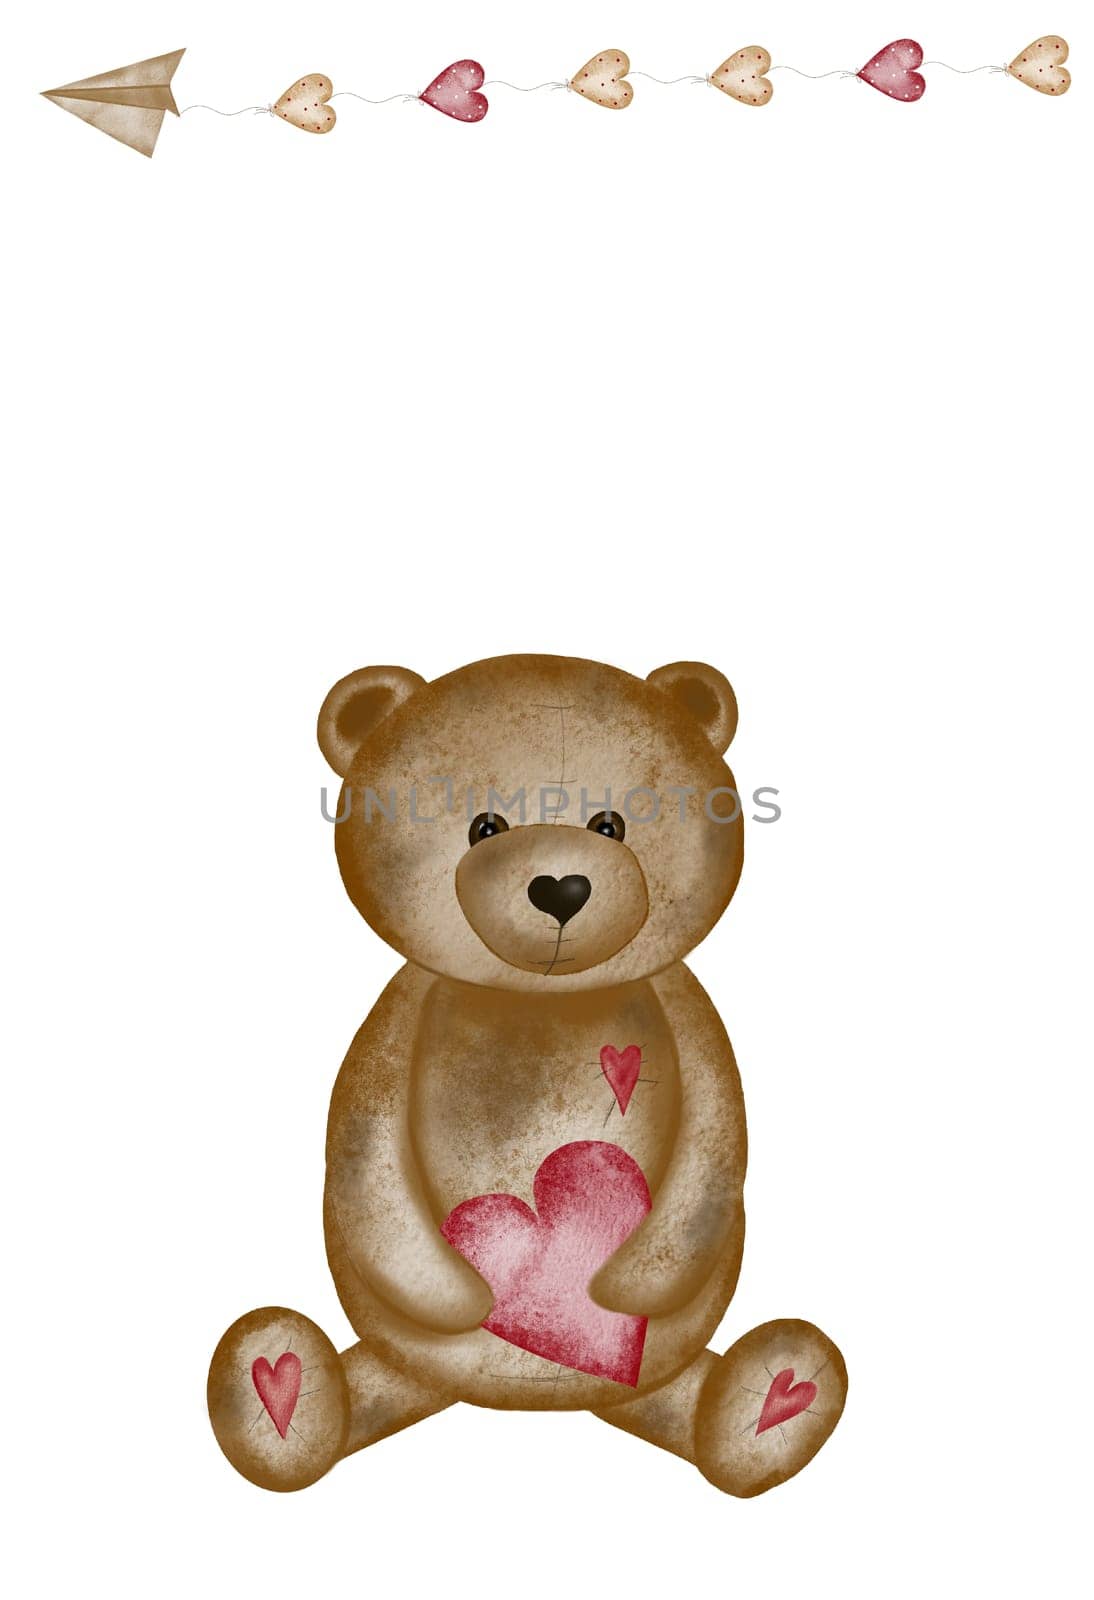 Watercolor drawing of a cute bear with a heart. Valentine's day card template with cute teddy bear. Holiday card for loved ones.